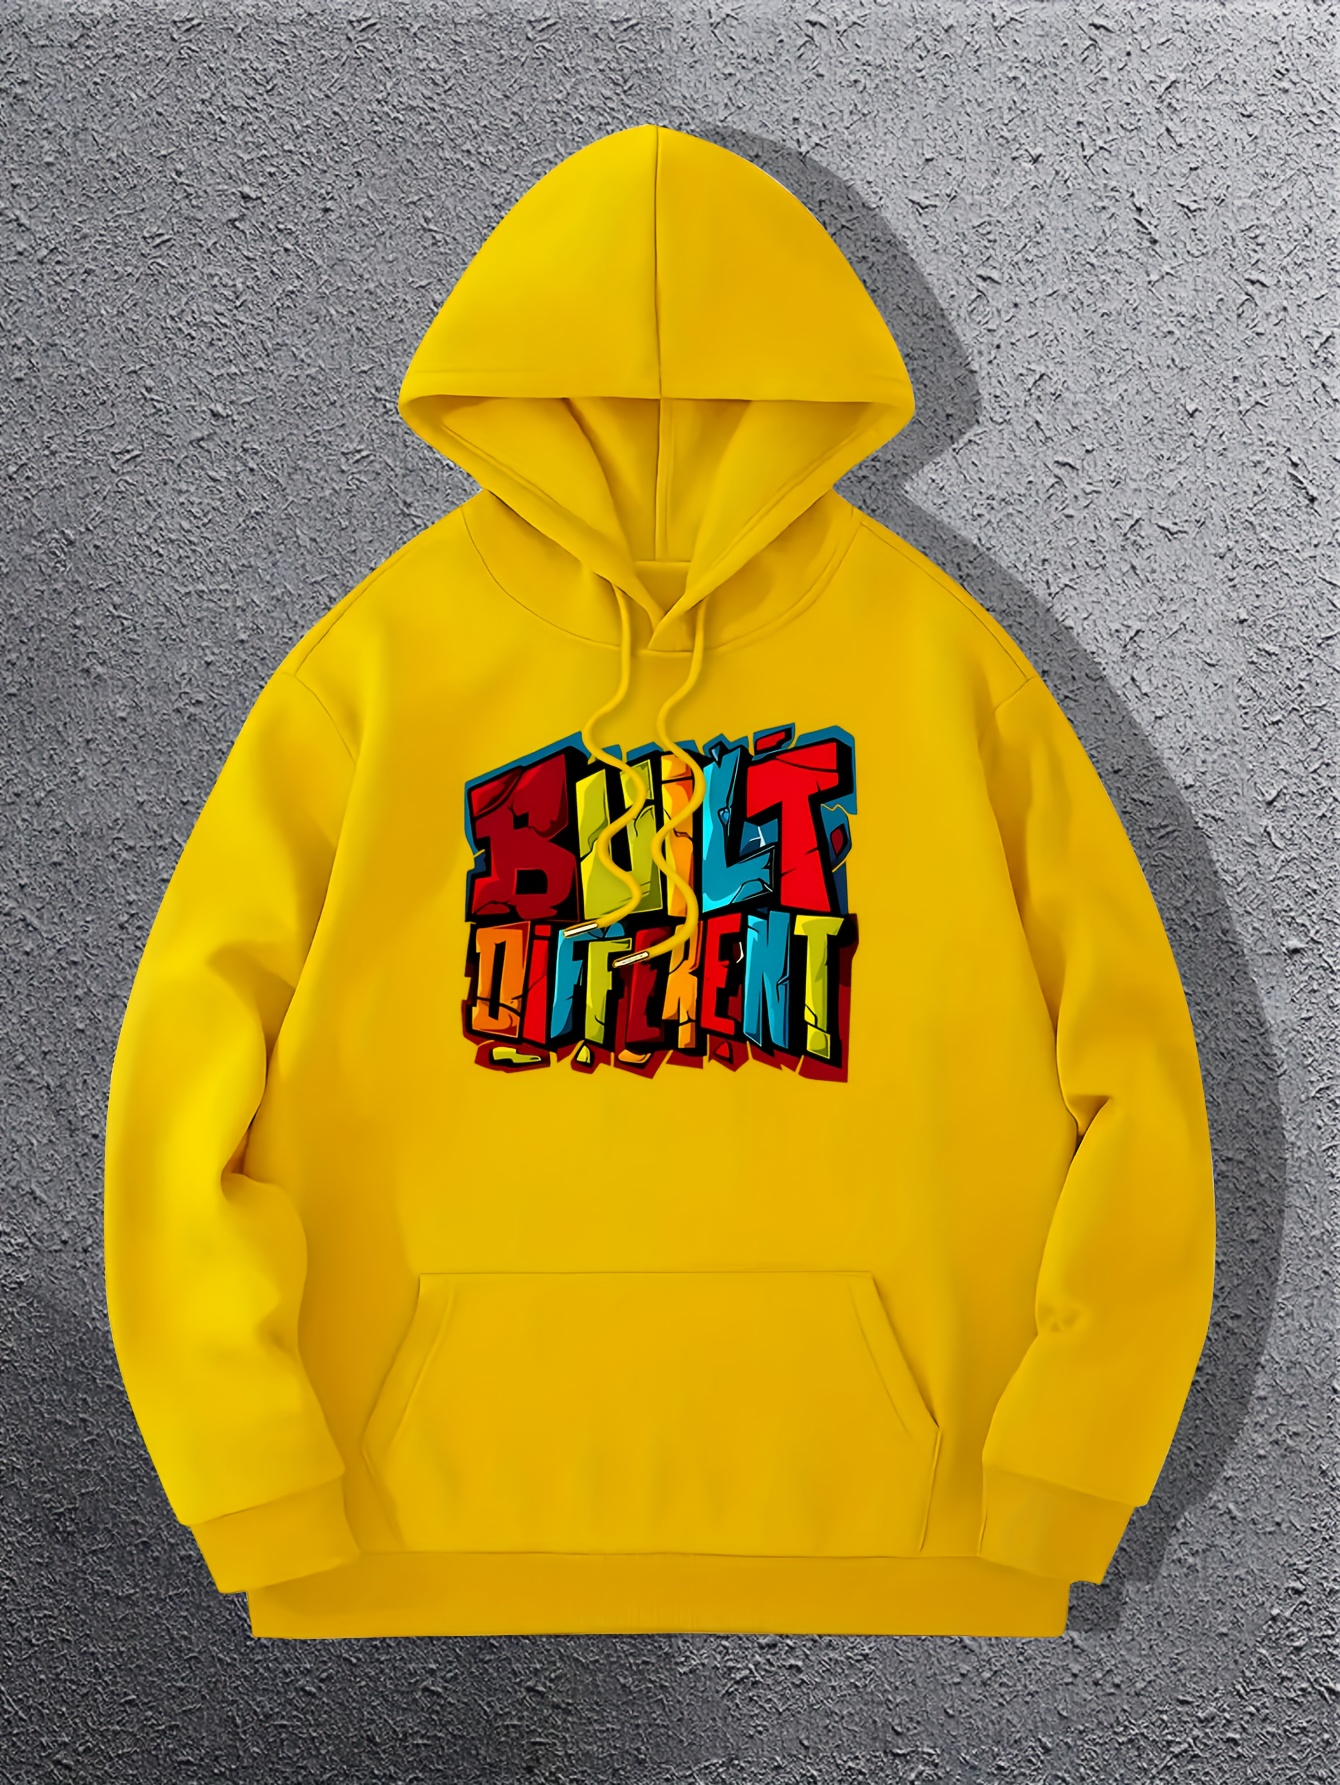 Colorful Letters Print Men’s Pullover Hooded Sweatshirt for Autumn/Winter